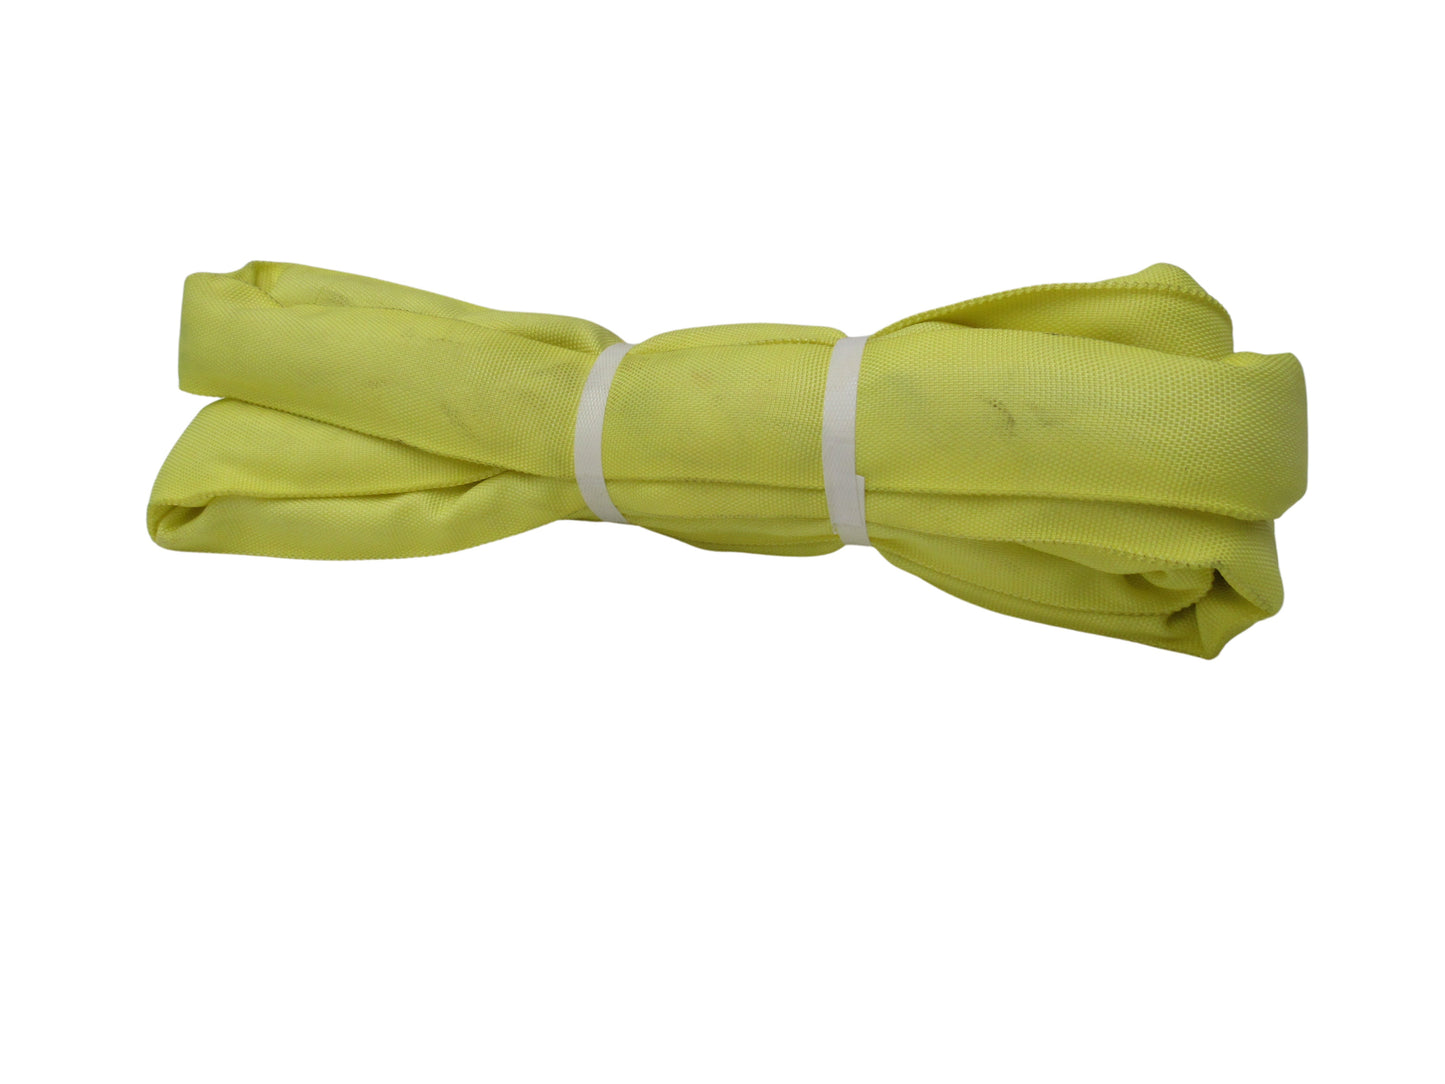 SWG 90 X 20' YELLOW ROUND SLING***MADE IN USA